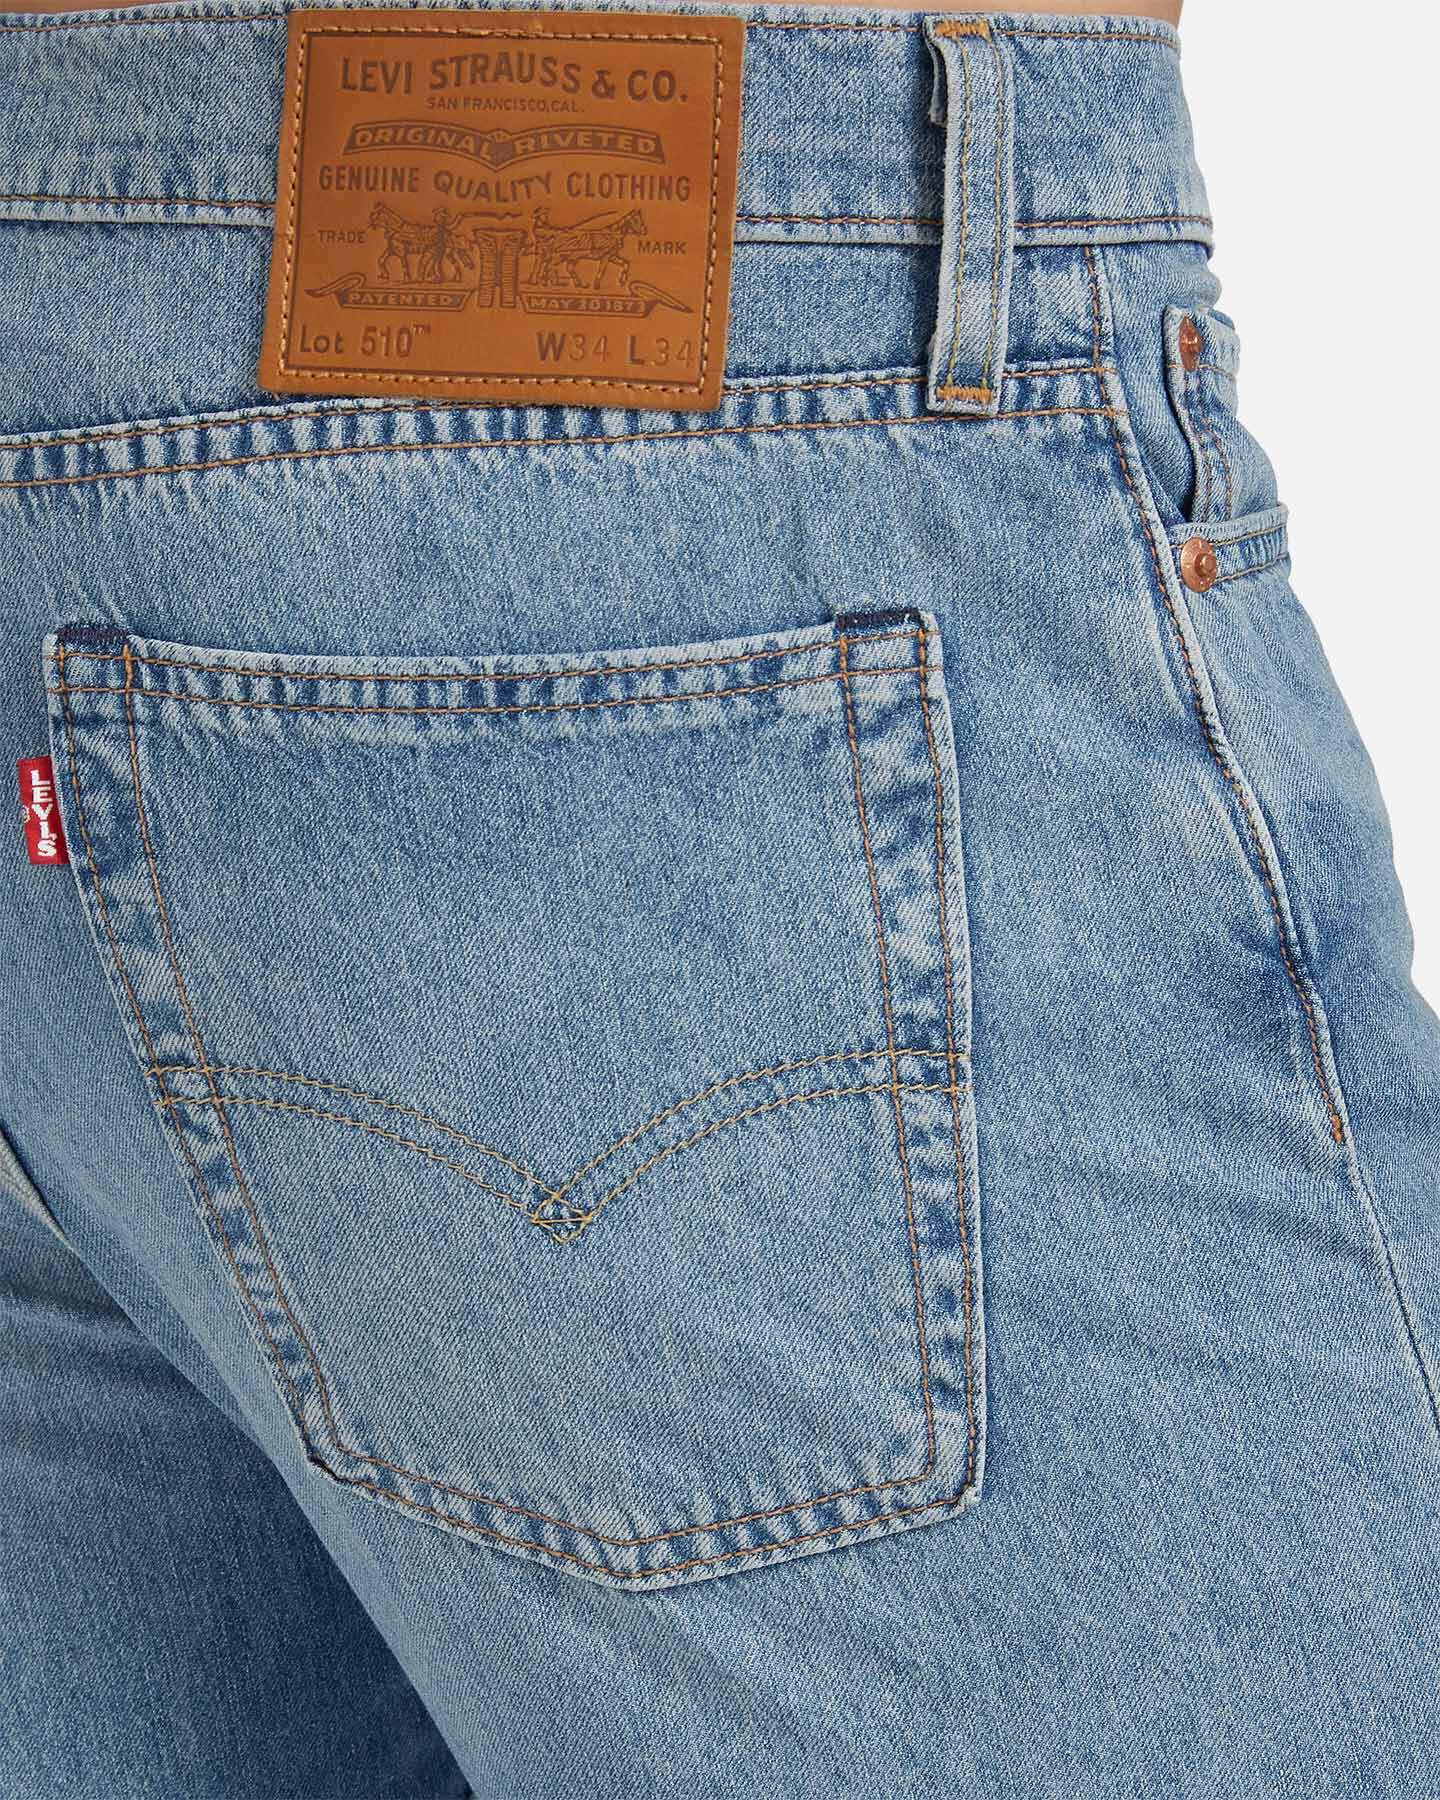  Jeans LEVI'S 510 SKINNY M S4076911|1051|30 scatto 3